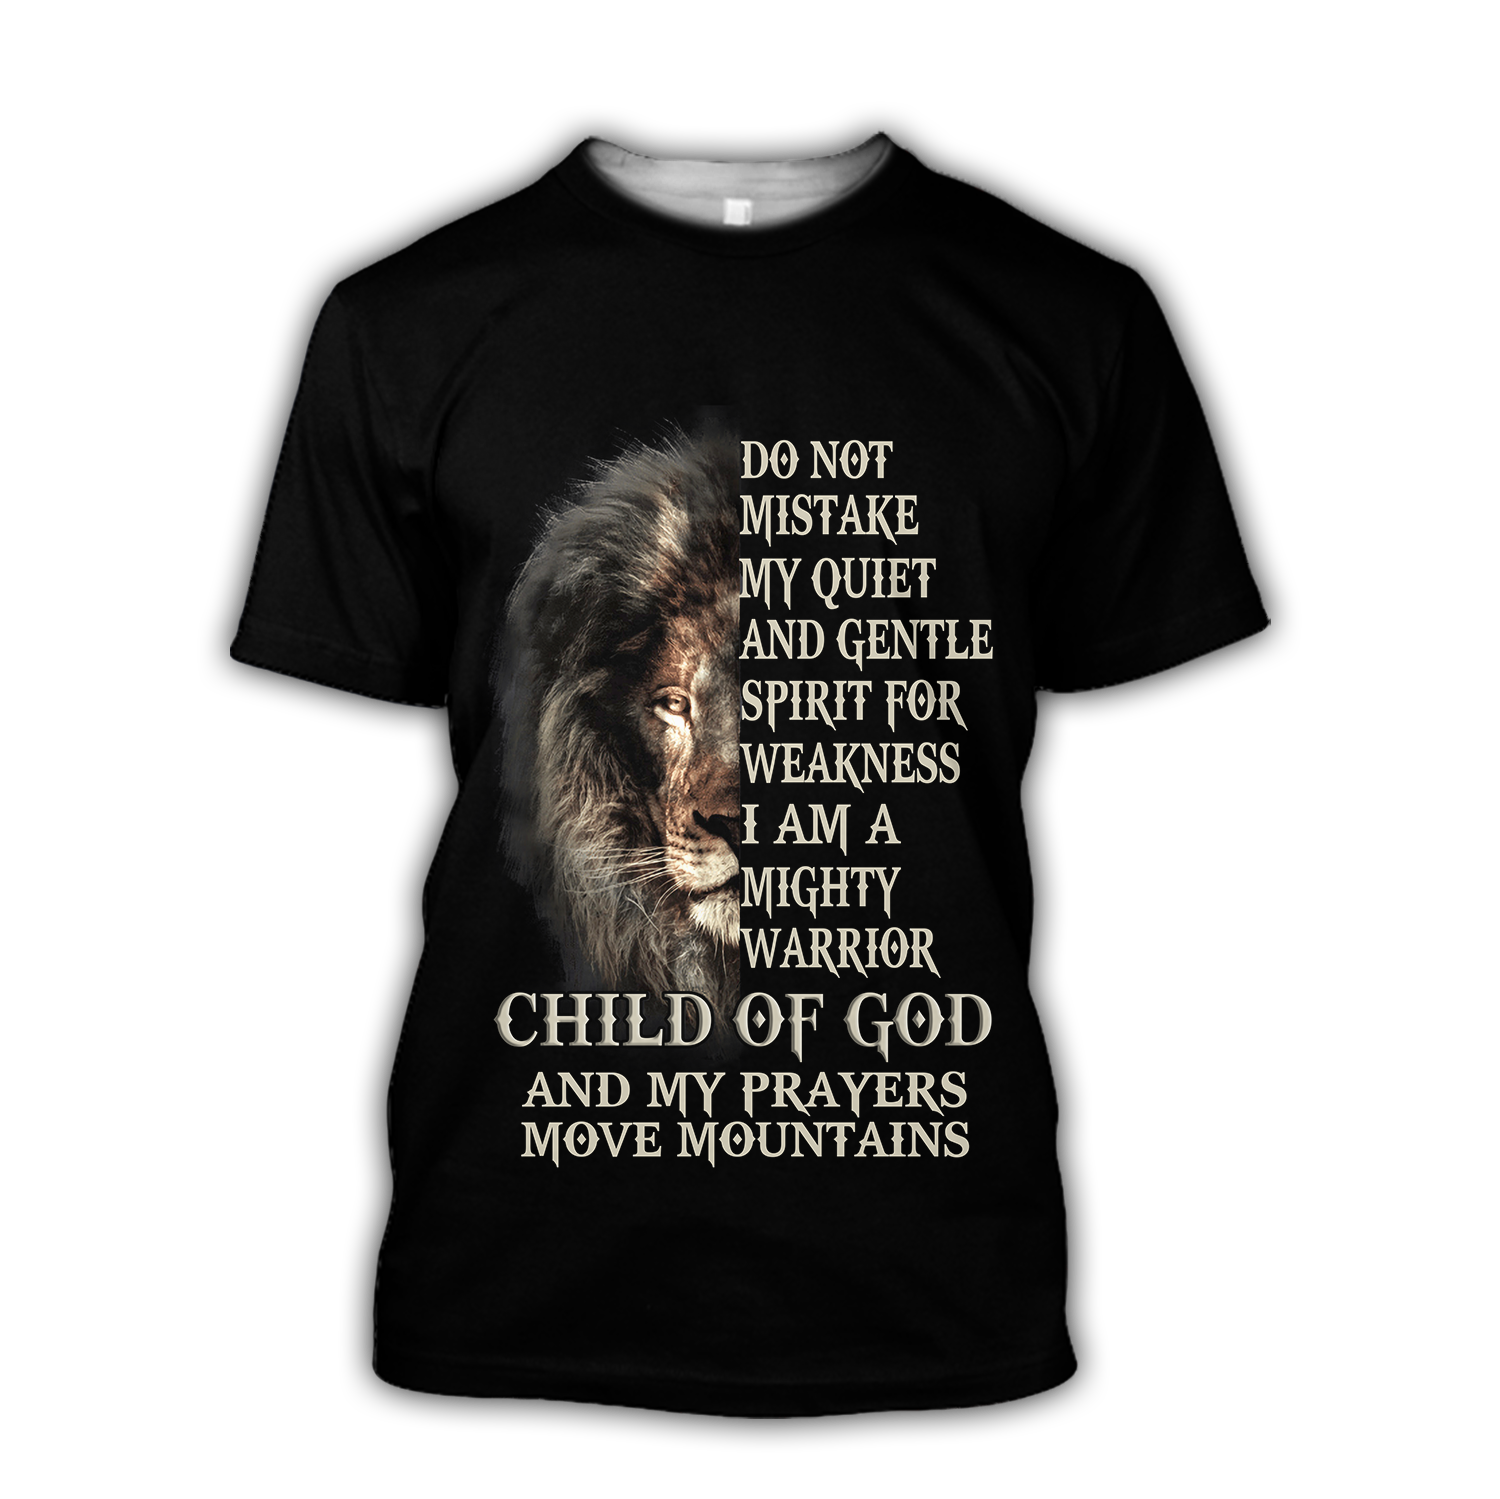 I'm a Mighty Warrior Child of God - T-Shirt Style for Men and Women